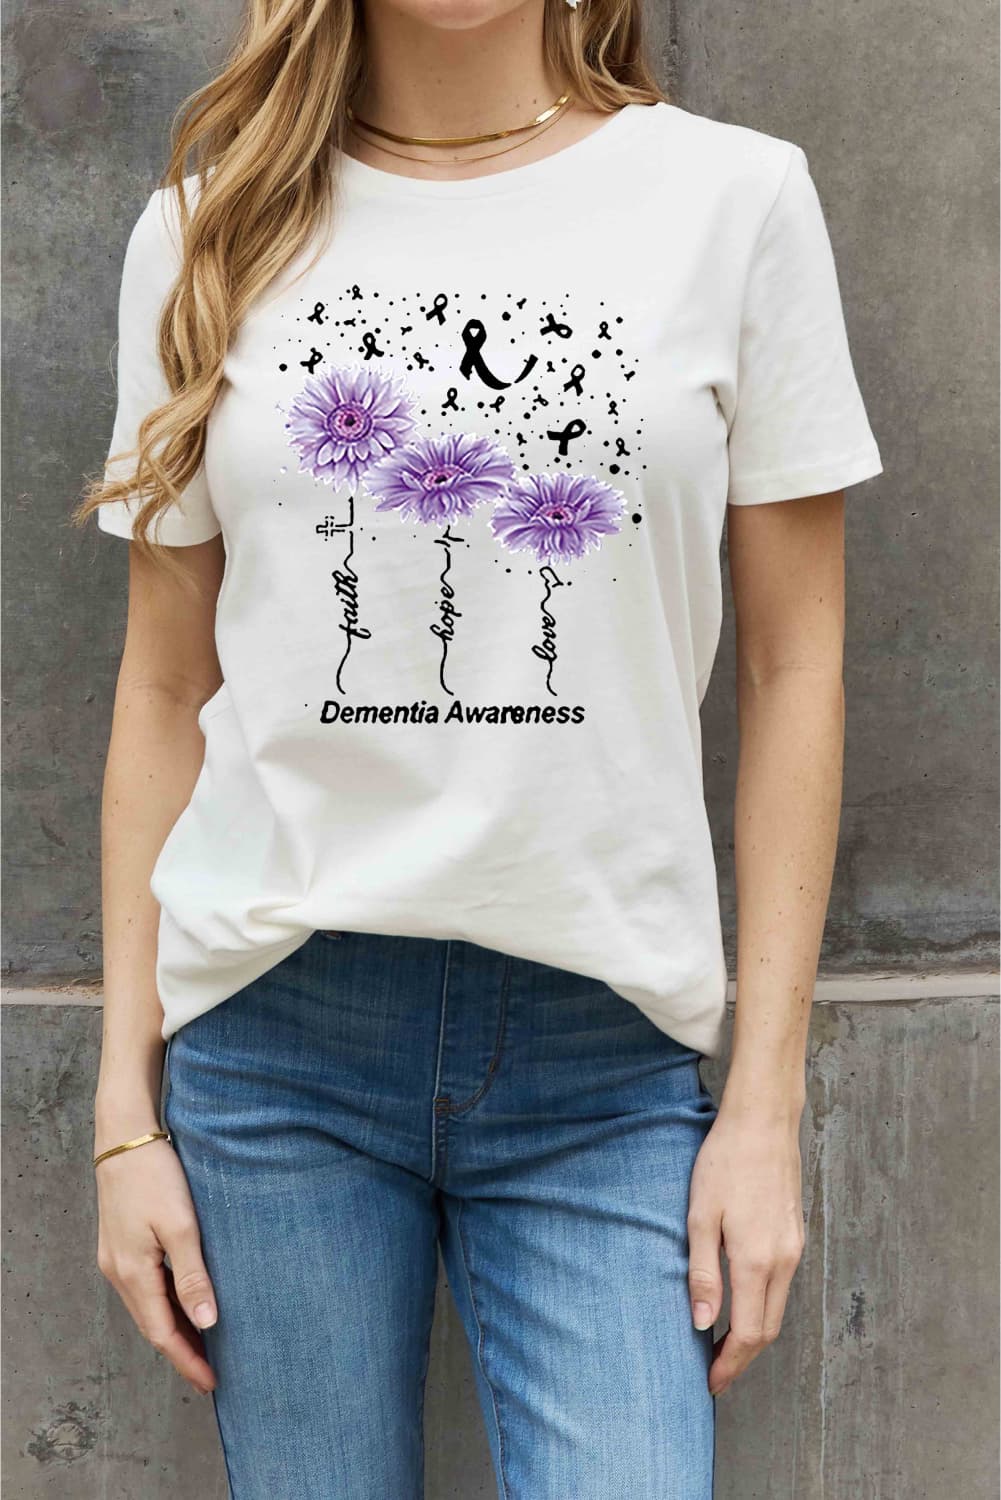 Simply Love Full Size DEMENTIA AWARENESS Graphic Cotton Tee